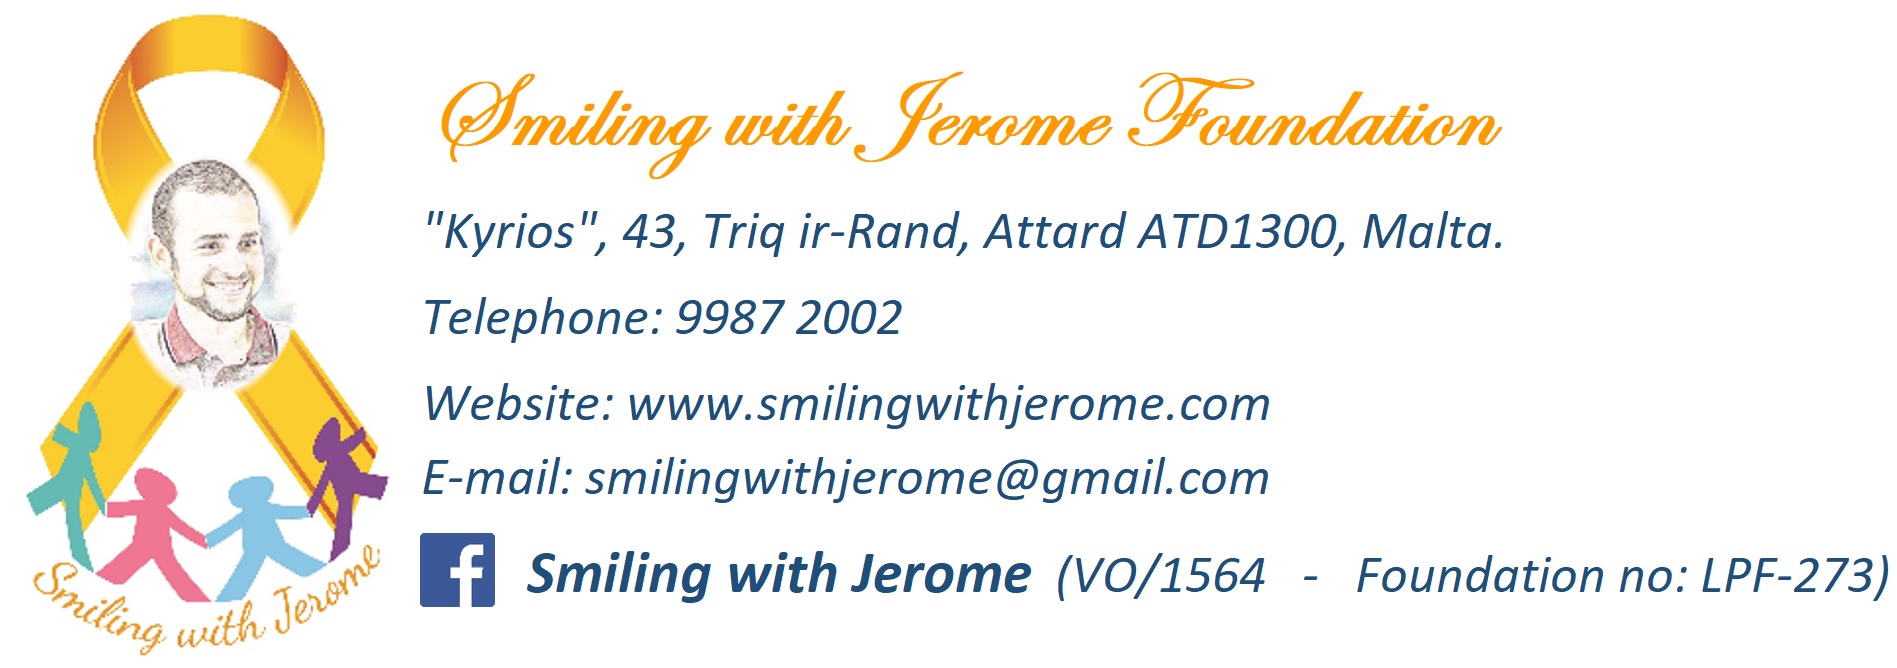 smiling with jerome